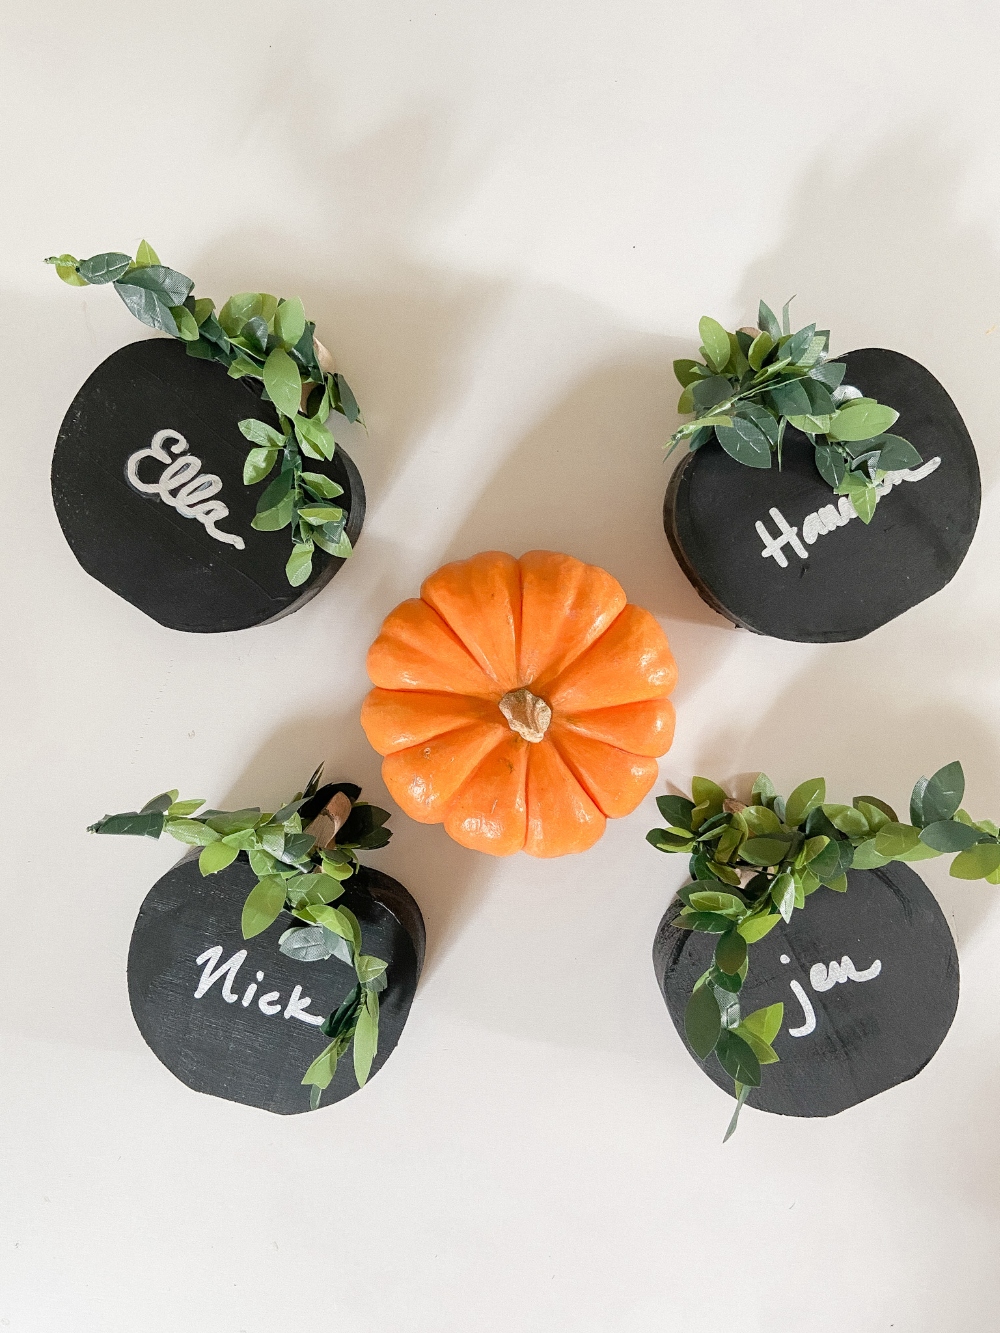 DIY Wood Chalkboard Pumpkin Place Markers. Get ready for fall entertaining by making these easy pumpkin-shaped wood chalkboard place markers! It’s a 10-minute project that can be used all autumn long!